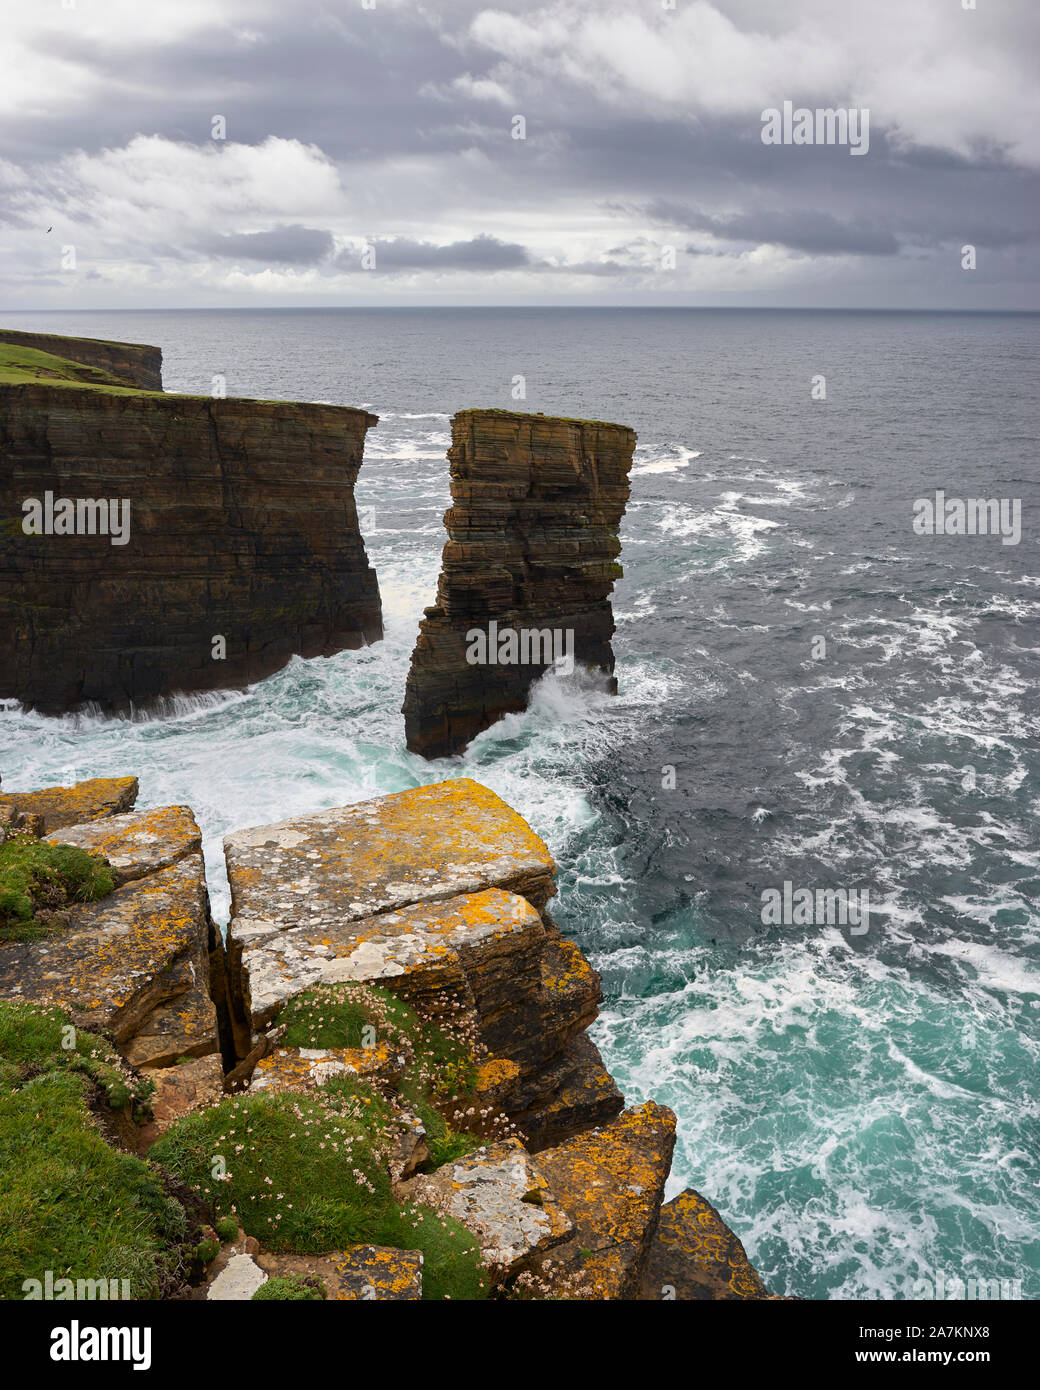 A nord mare Gaulton stack, Yesnaby, Continentale, Orkney, Scozia Foto Stock